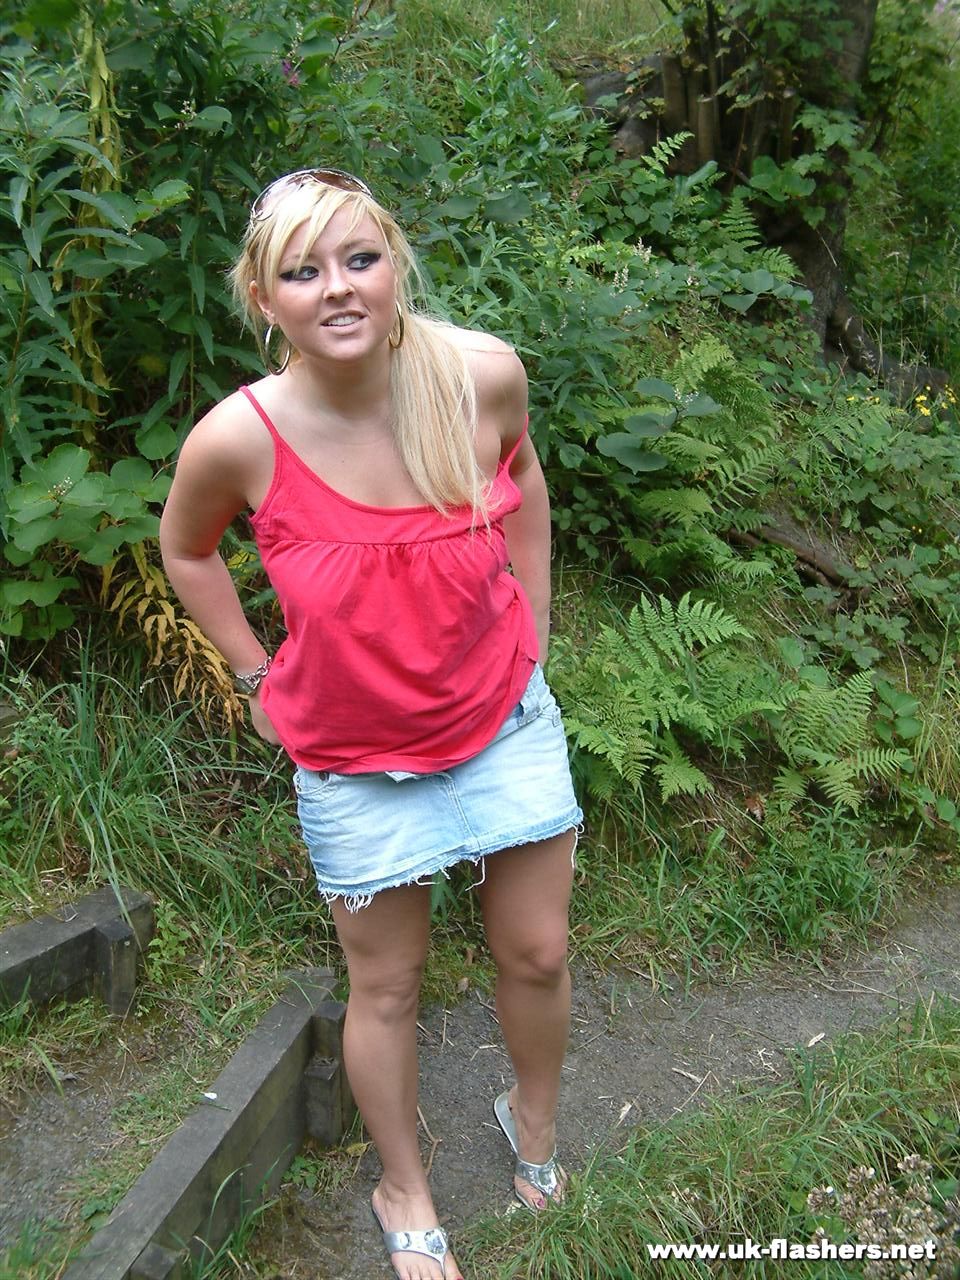 Overweight UK female with blonde hair strips naked on a popular walking trails ポルノ写真 #428197328 | UK Flashers Pics, Lena Leigh, Public, モバイルポルノ